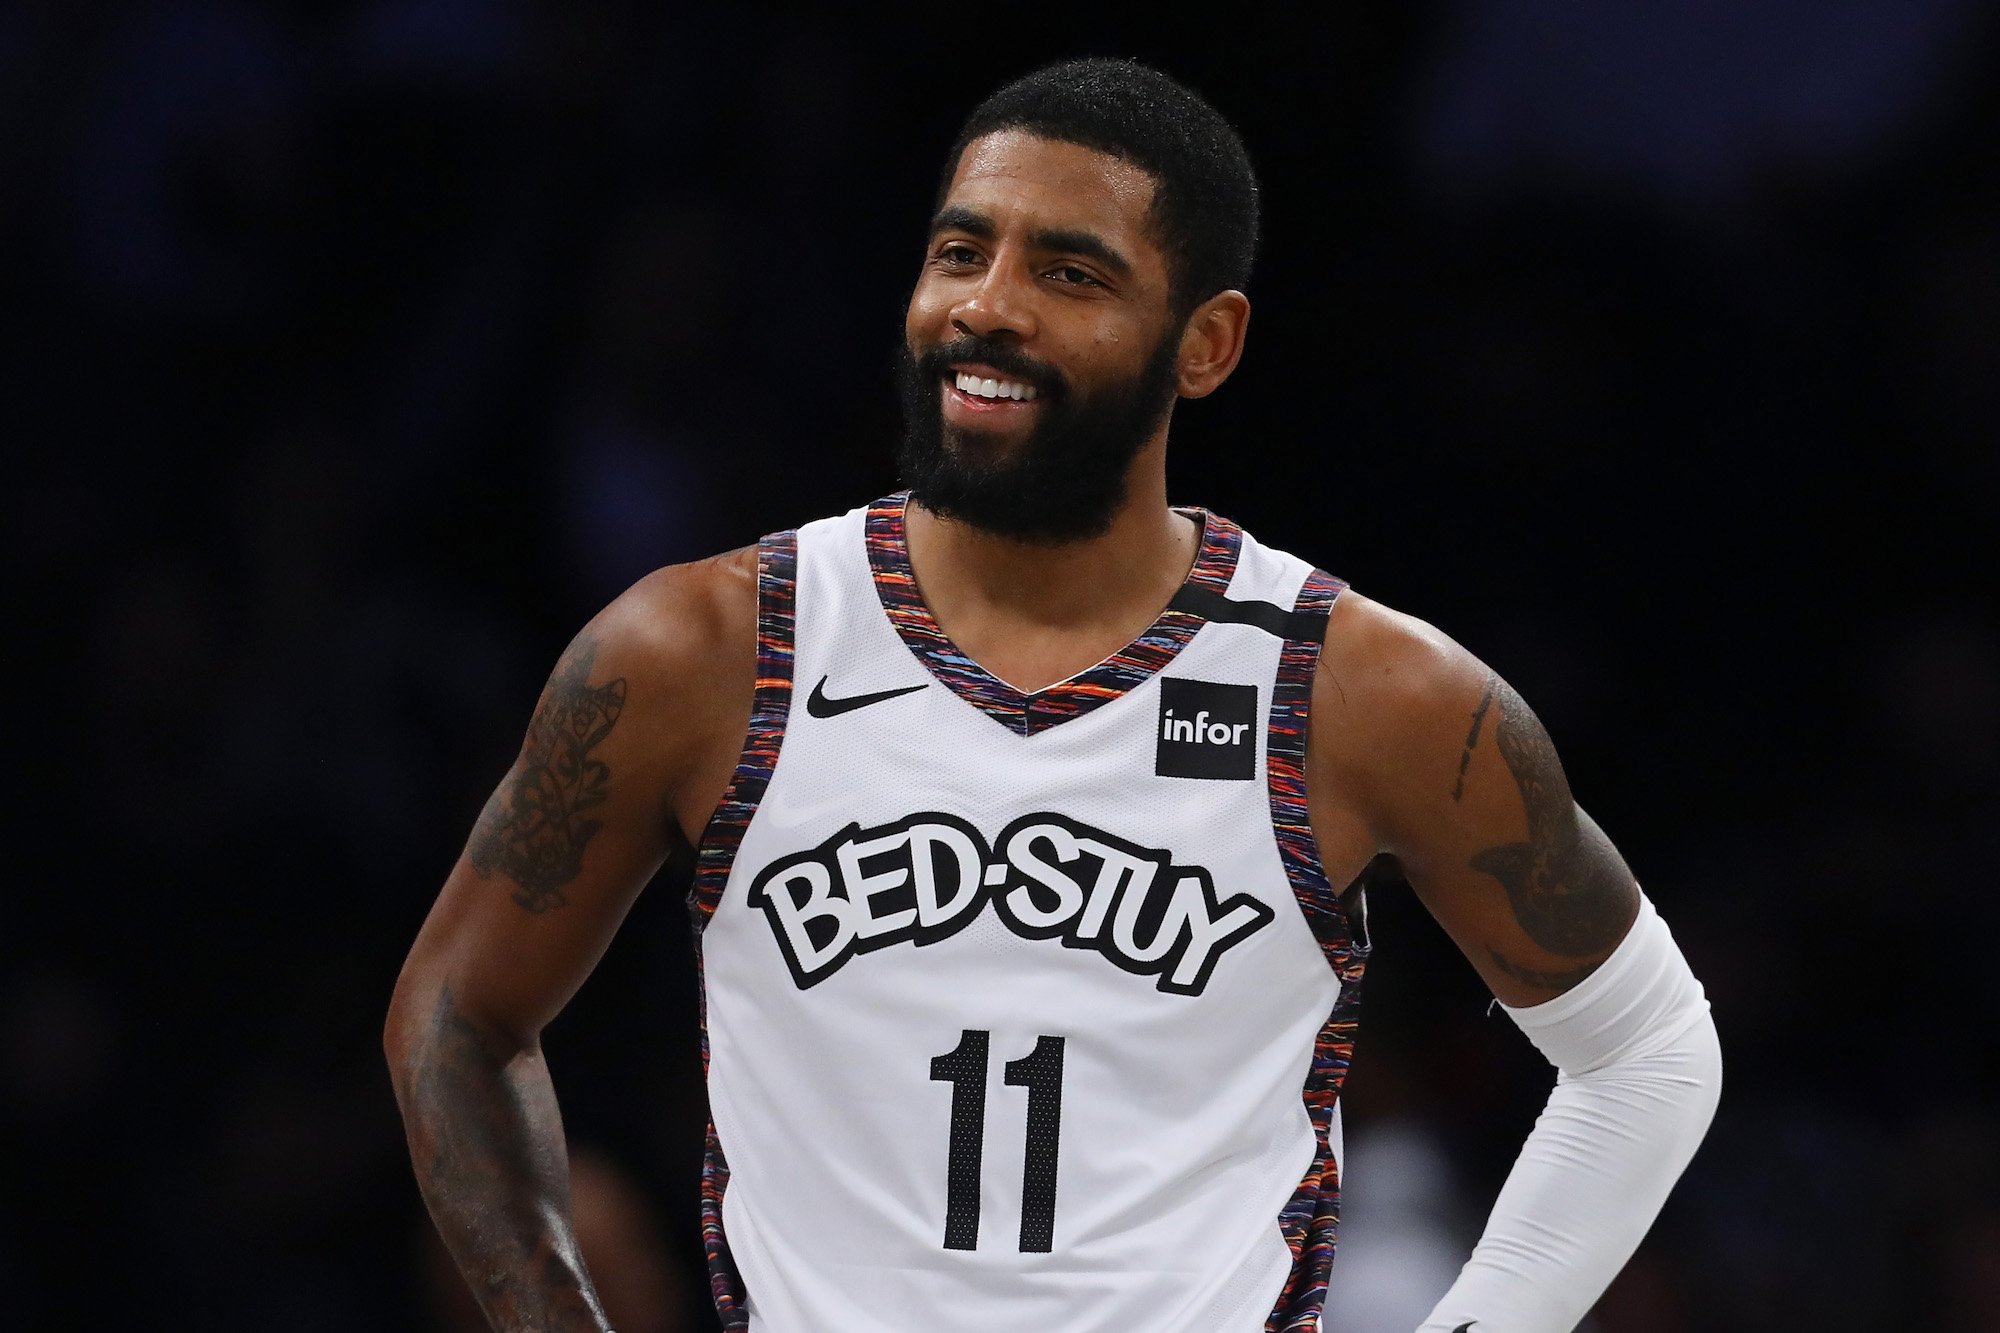 Kyrie Irving smiling on the court